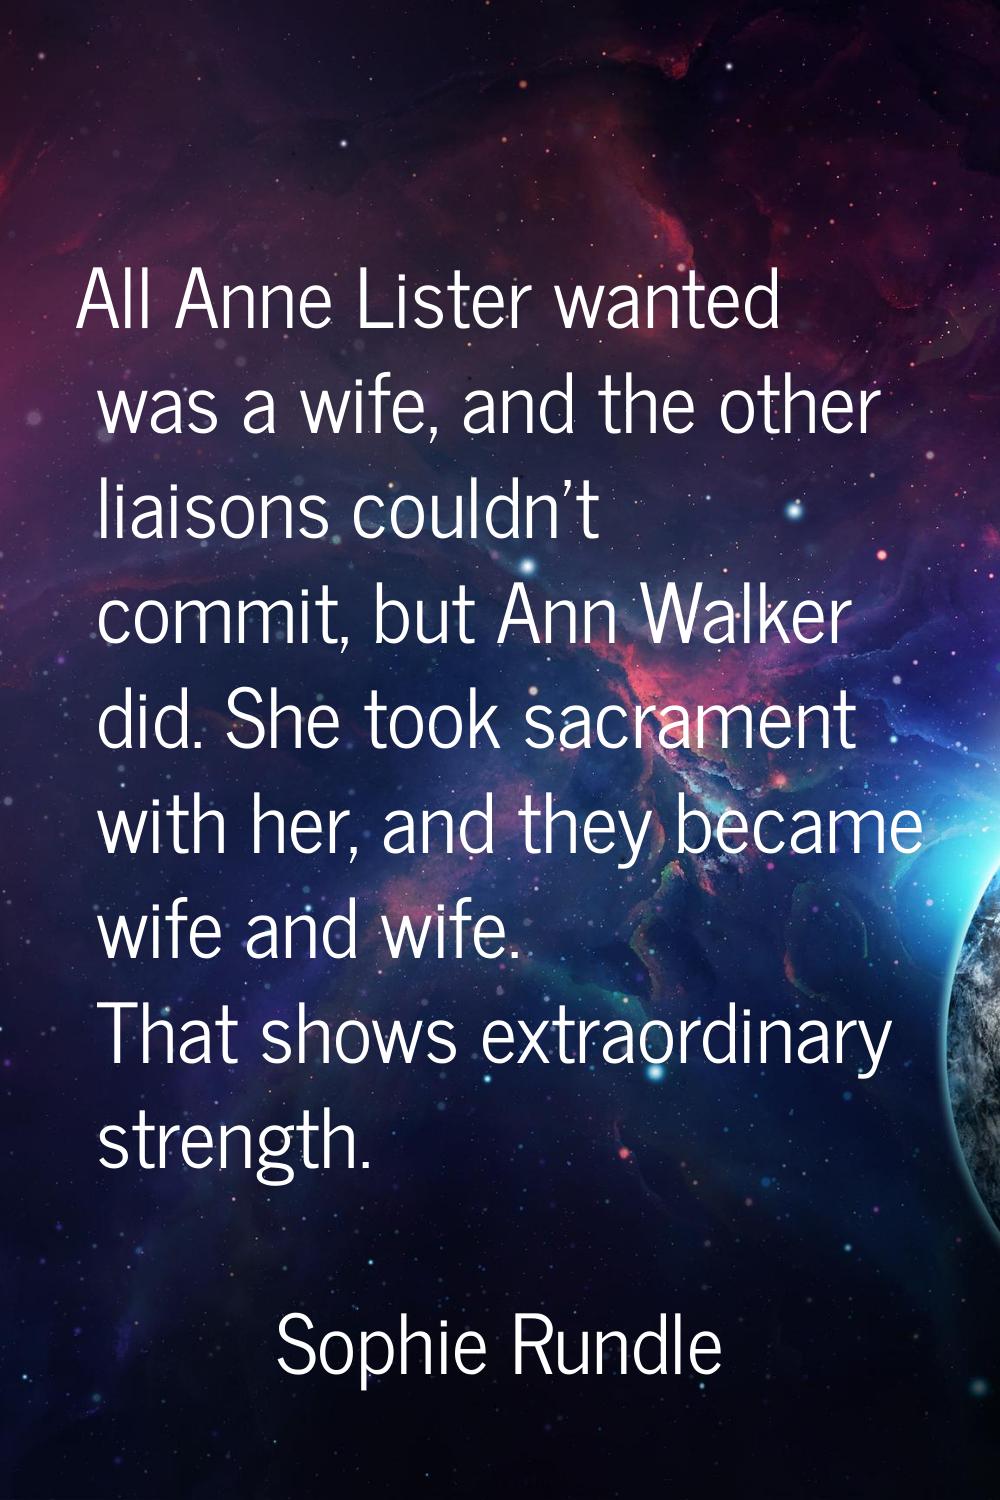 All Anne Lister wanted was a wife, and the other liaisons couldn't commit, but Ann Walker did. She 